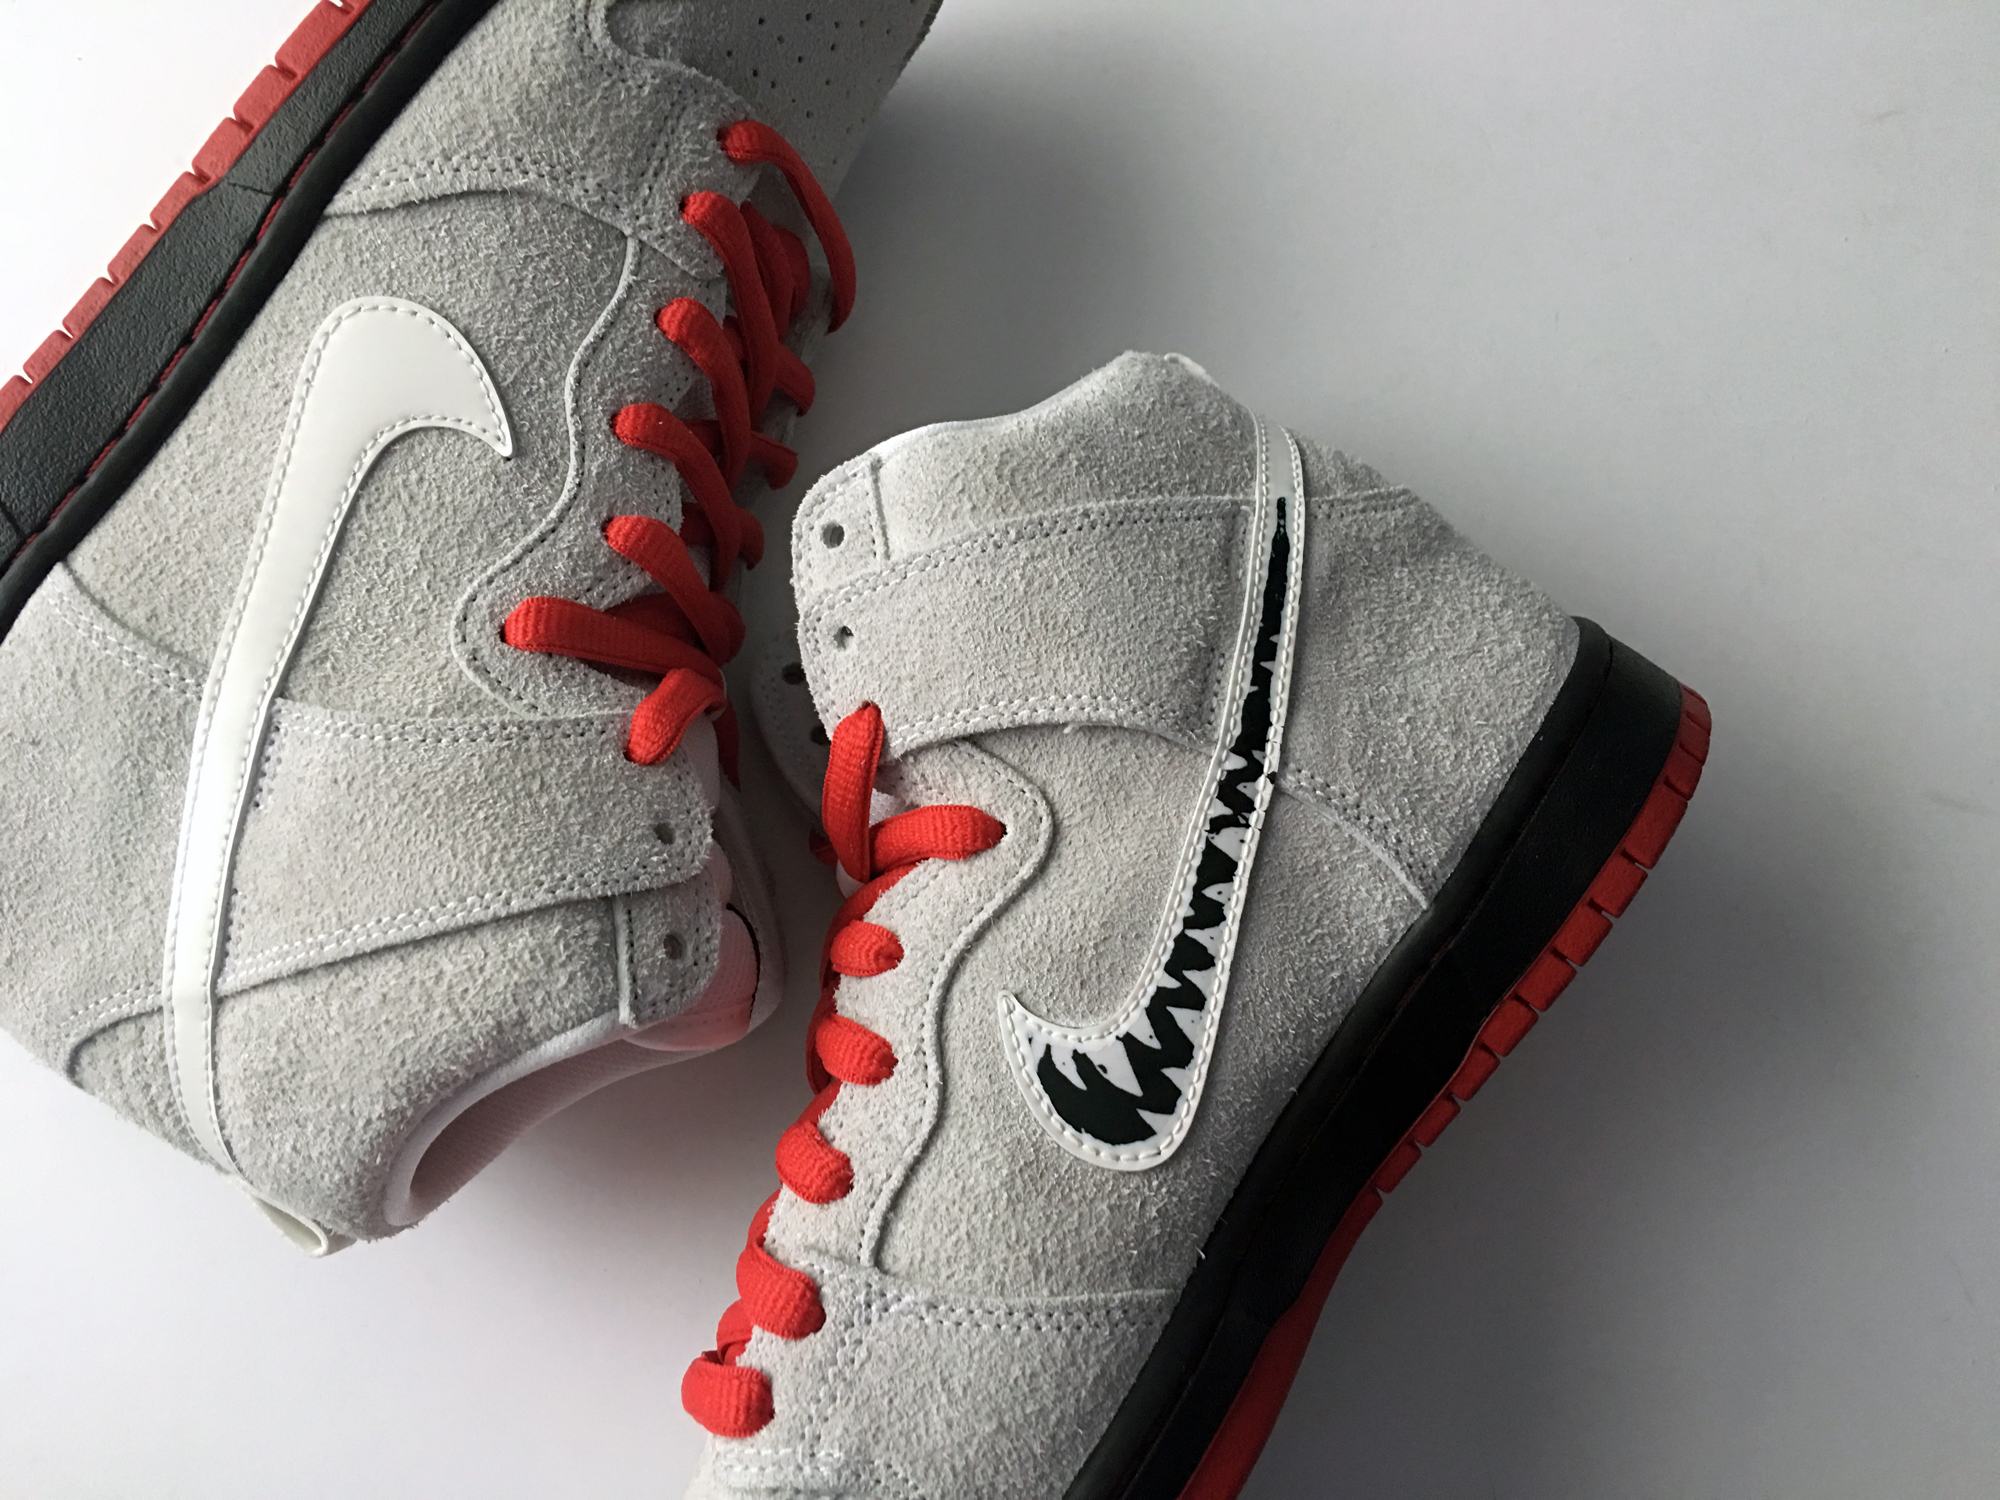 sb dunk wolf in sheep's clothing